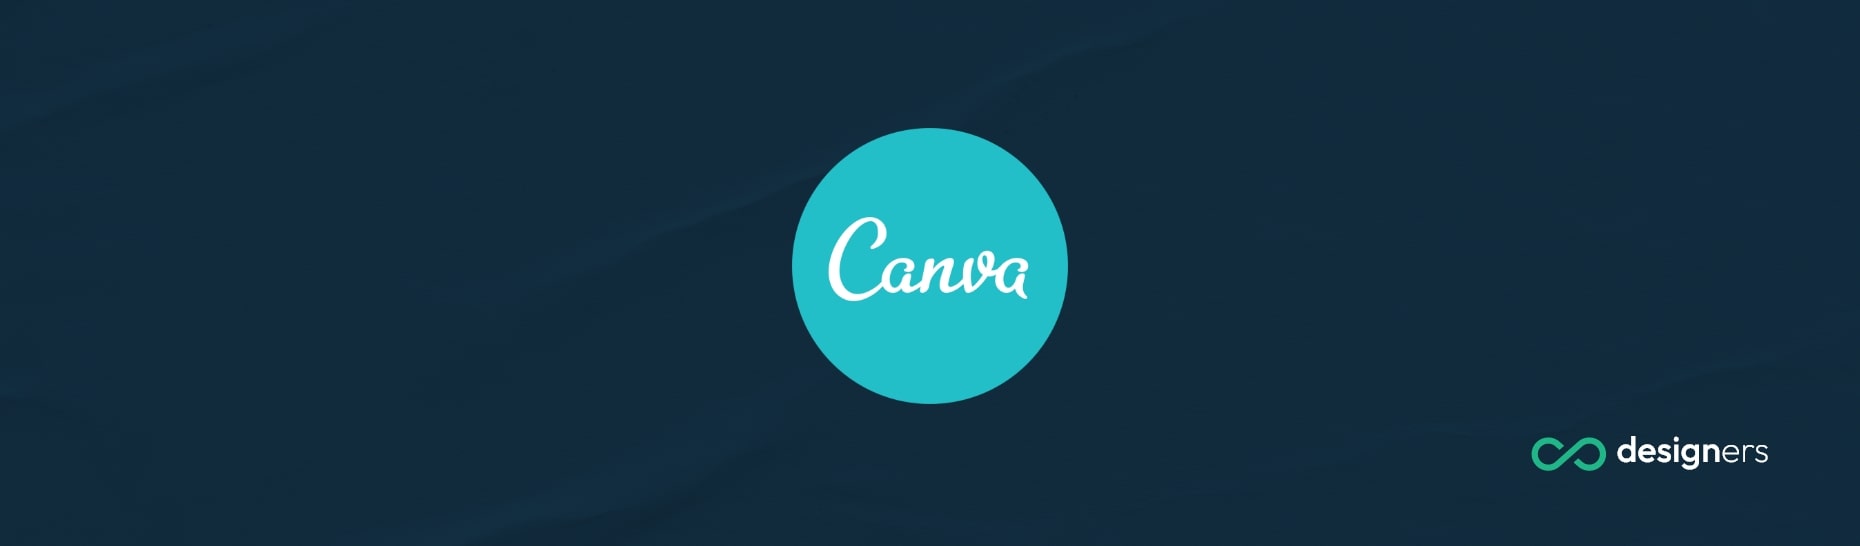 Is Canva Good for Real Estate?